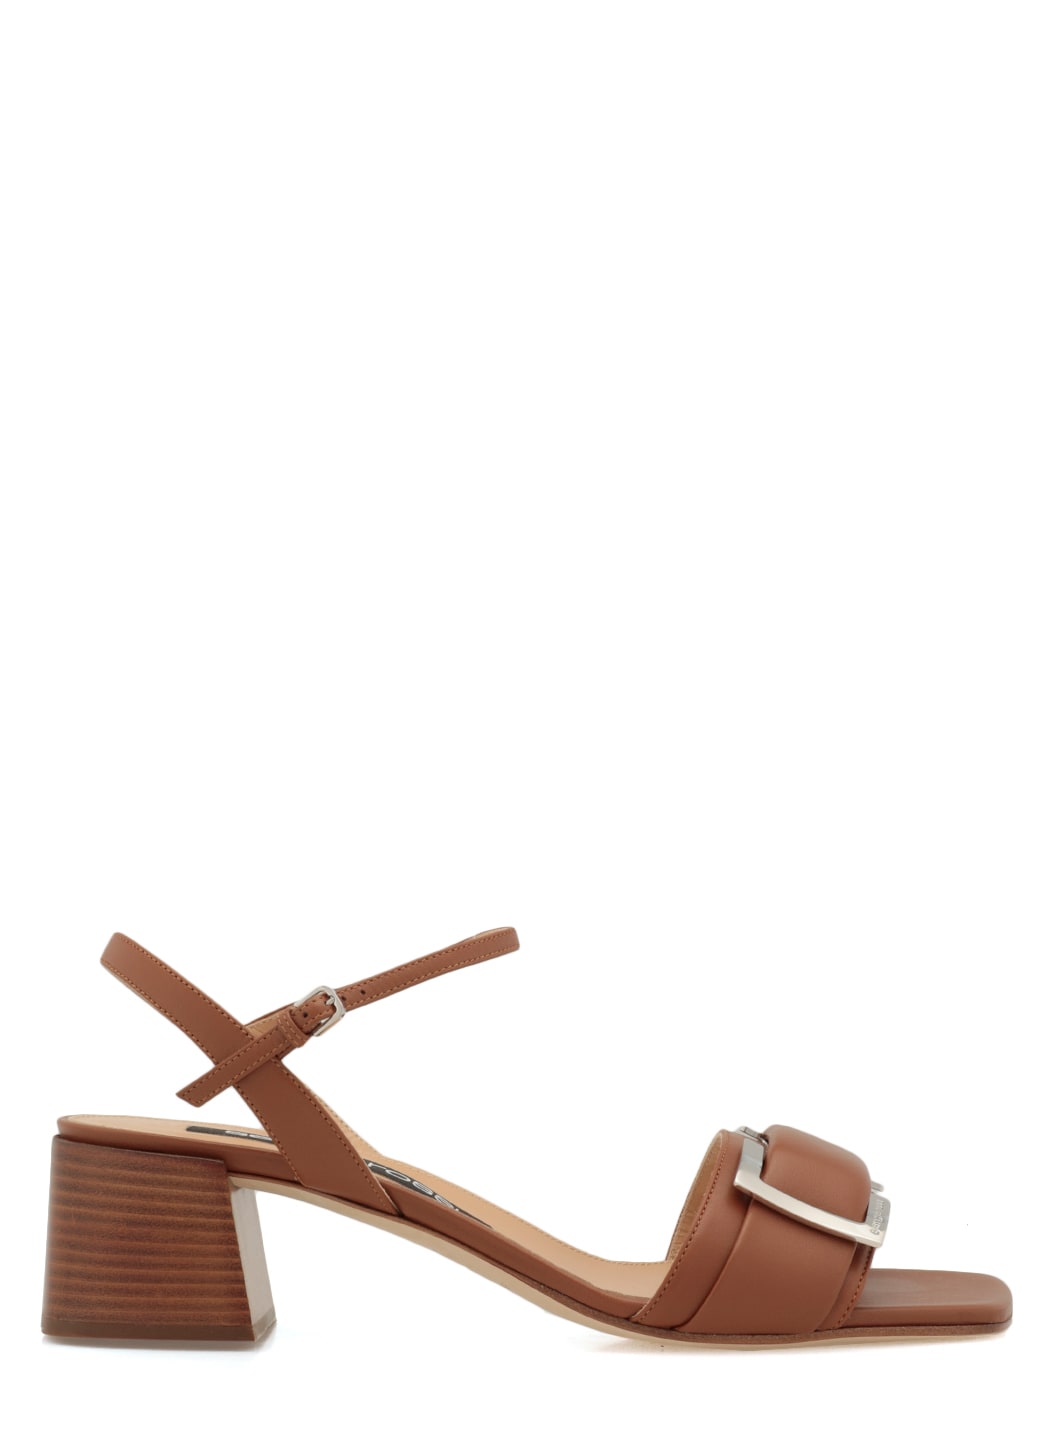 Buy Sergio Rossi Lamb Tassel Sandal online, shop Sergio Rossi shoes with free shipping